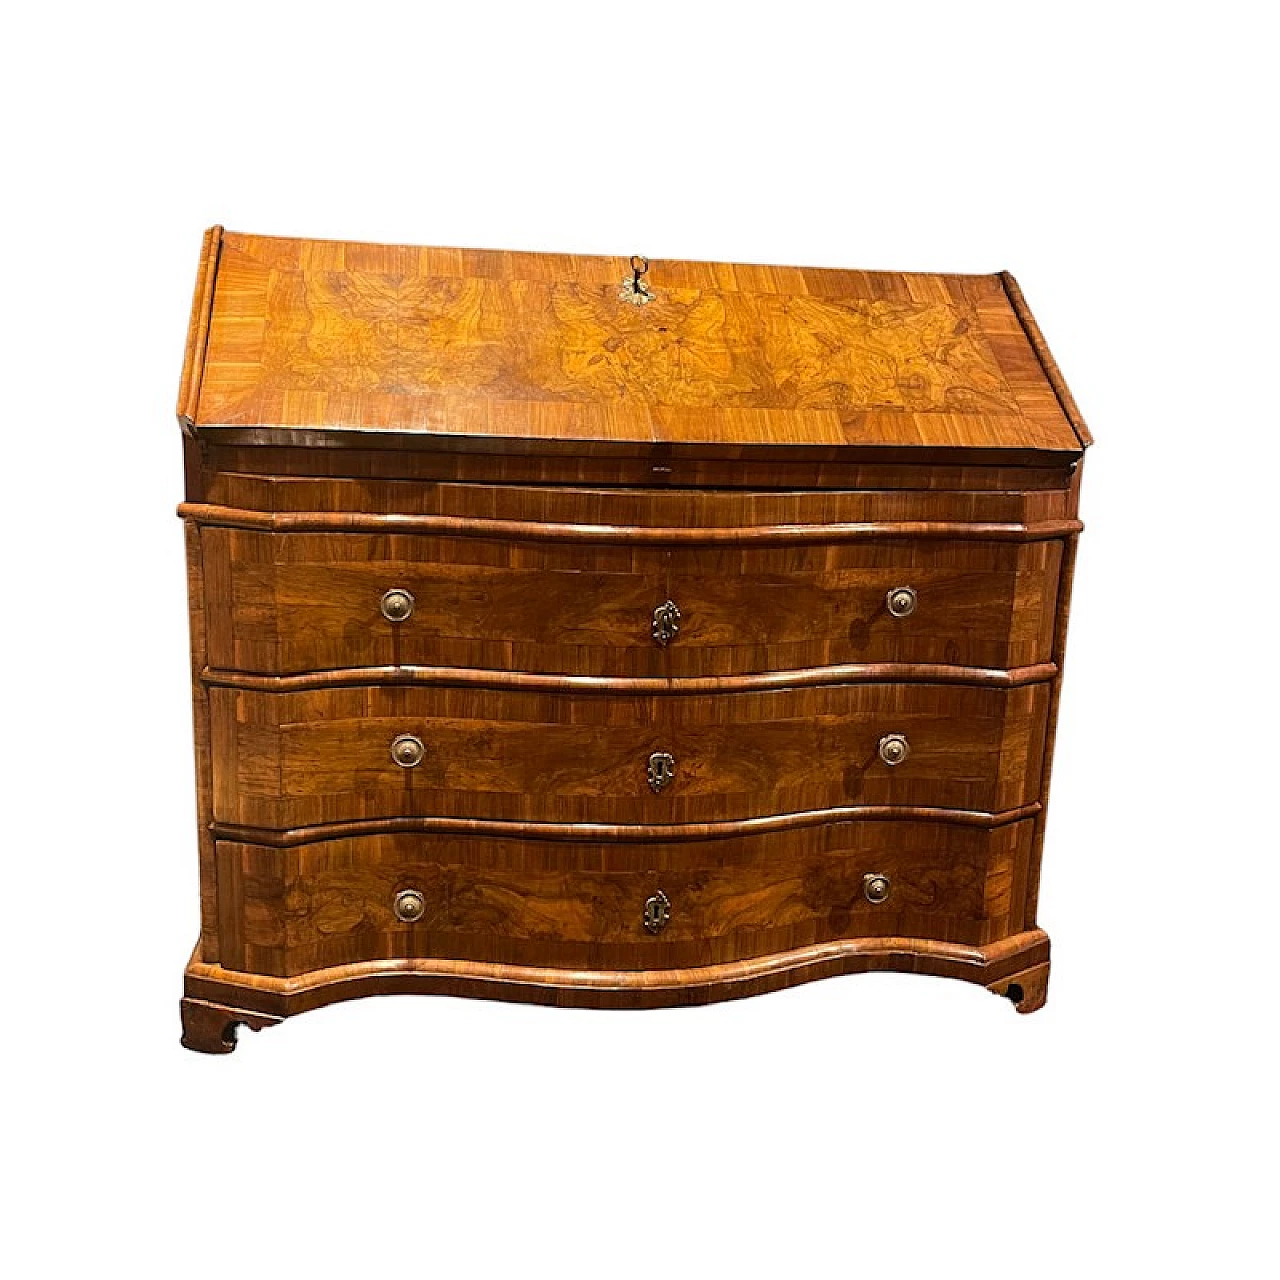 Walnut flap chest of drawers, 18th century 18